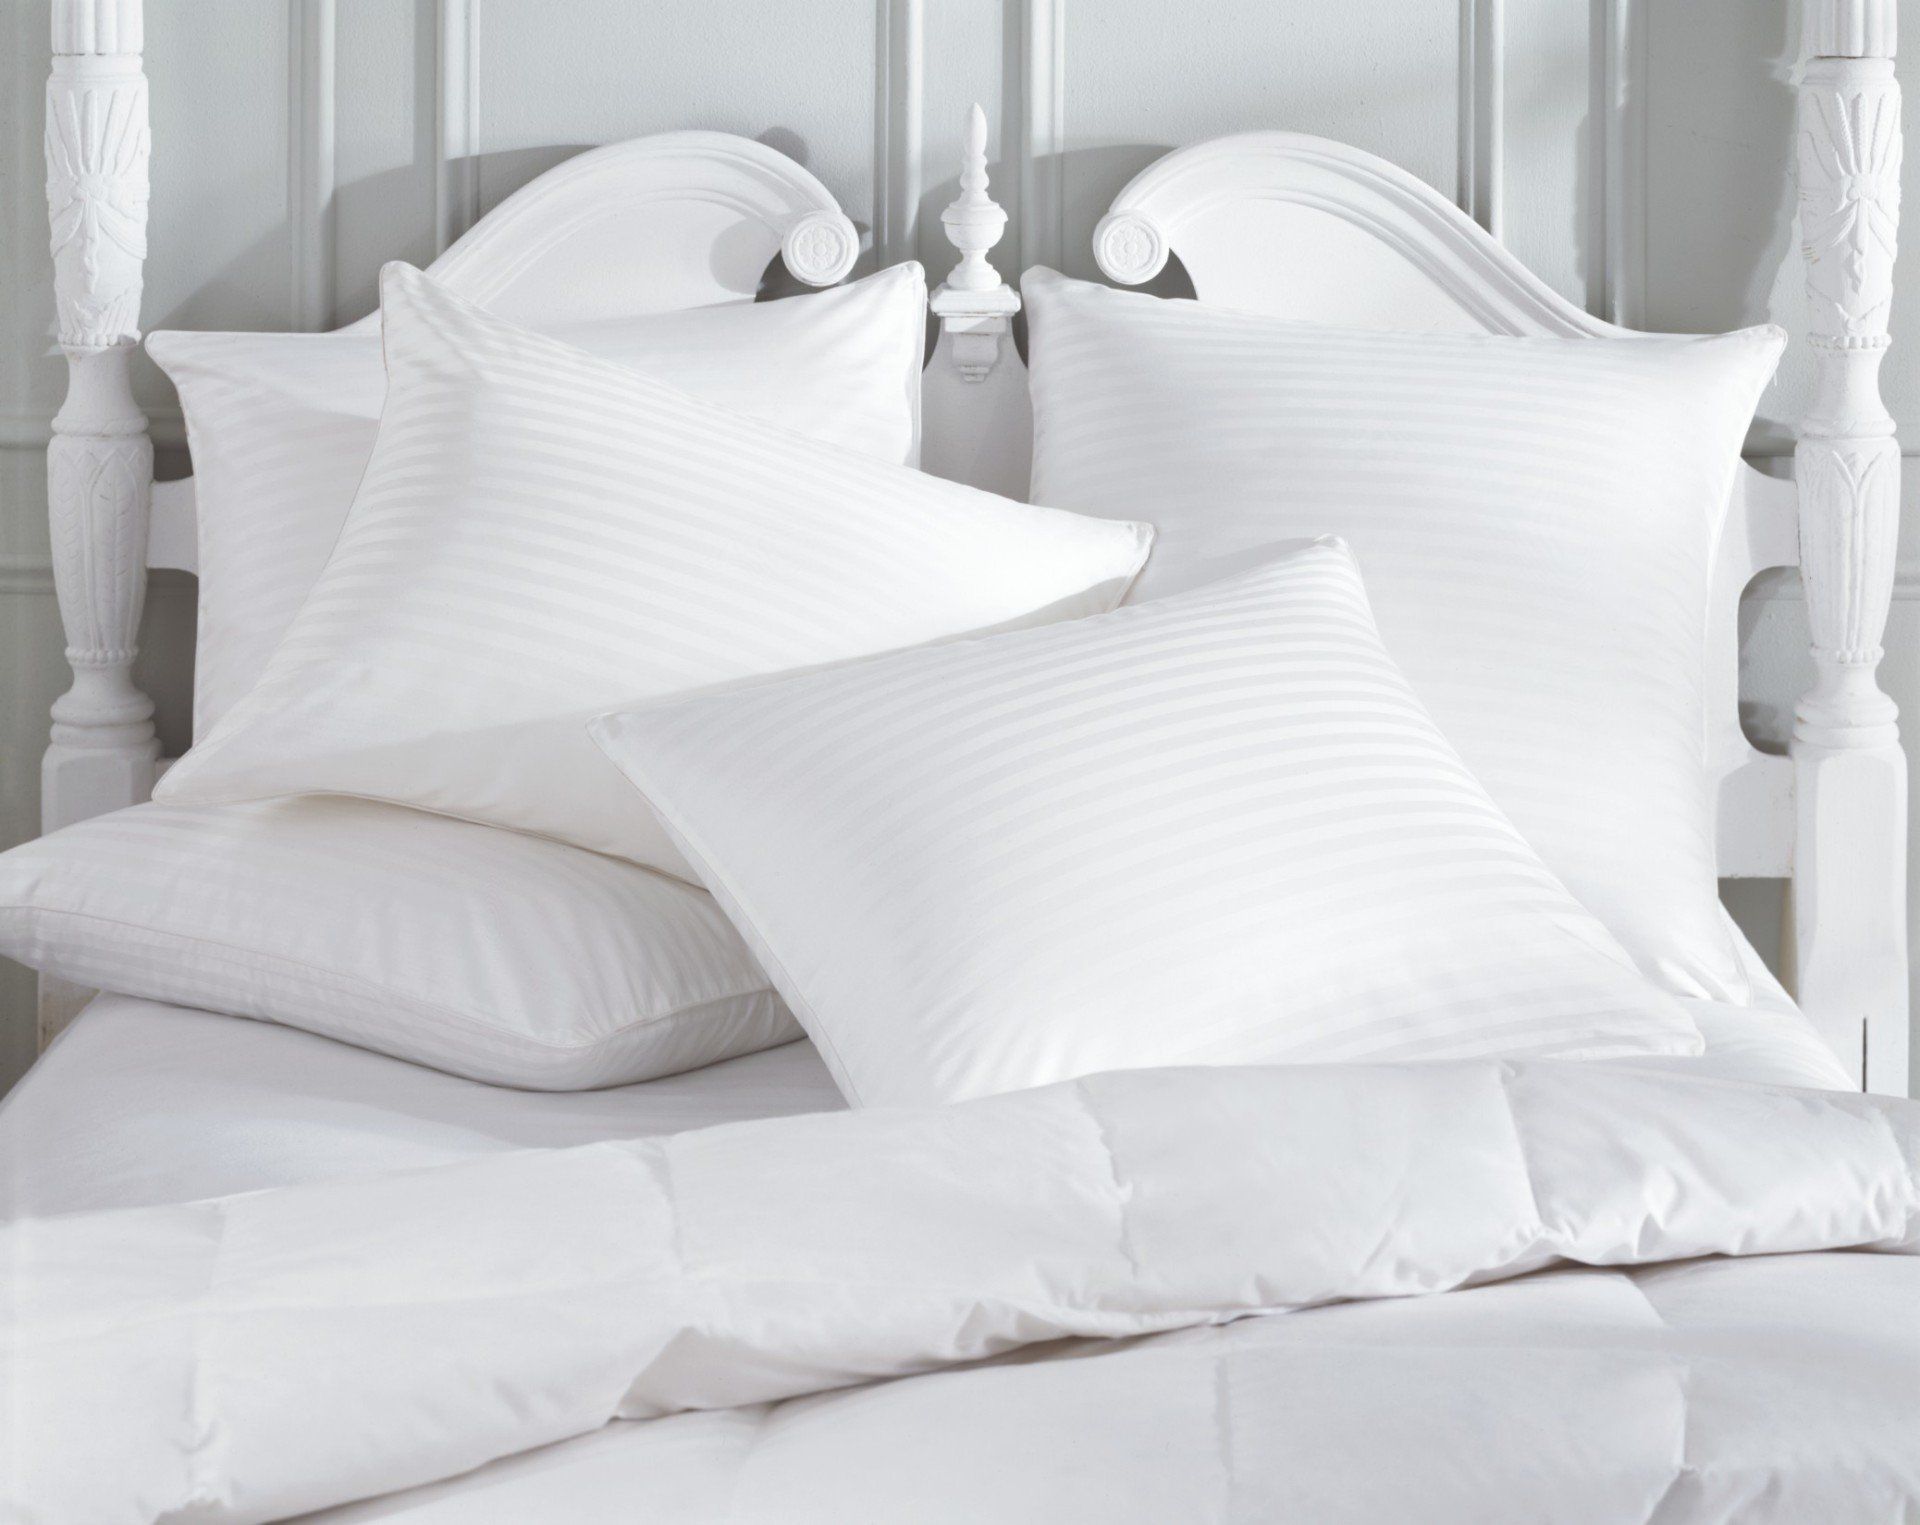 Clean pillows on a nice bed.